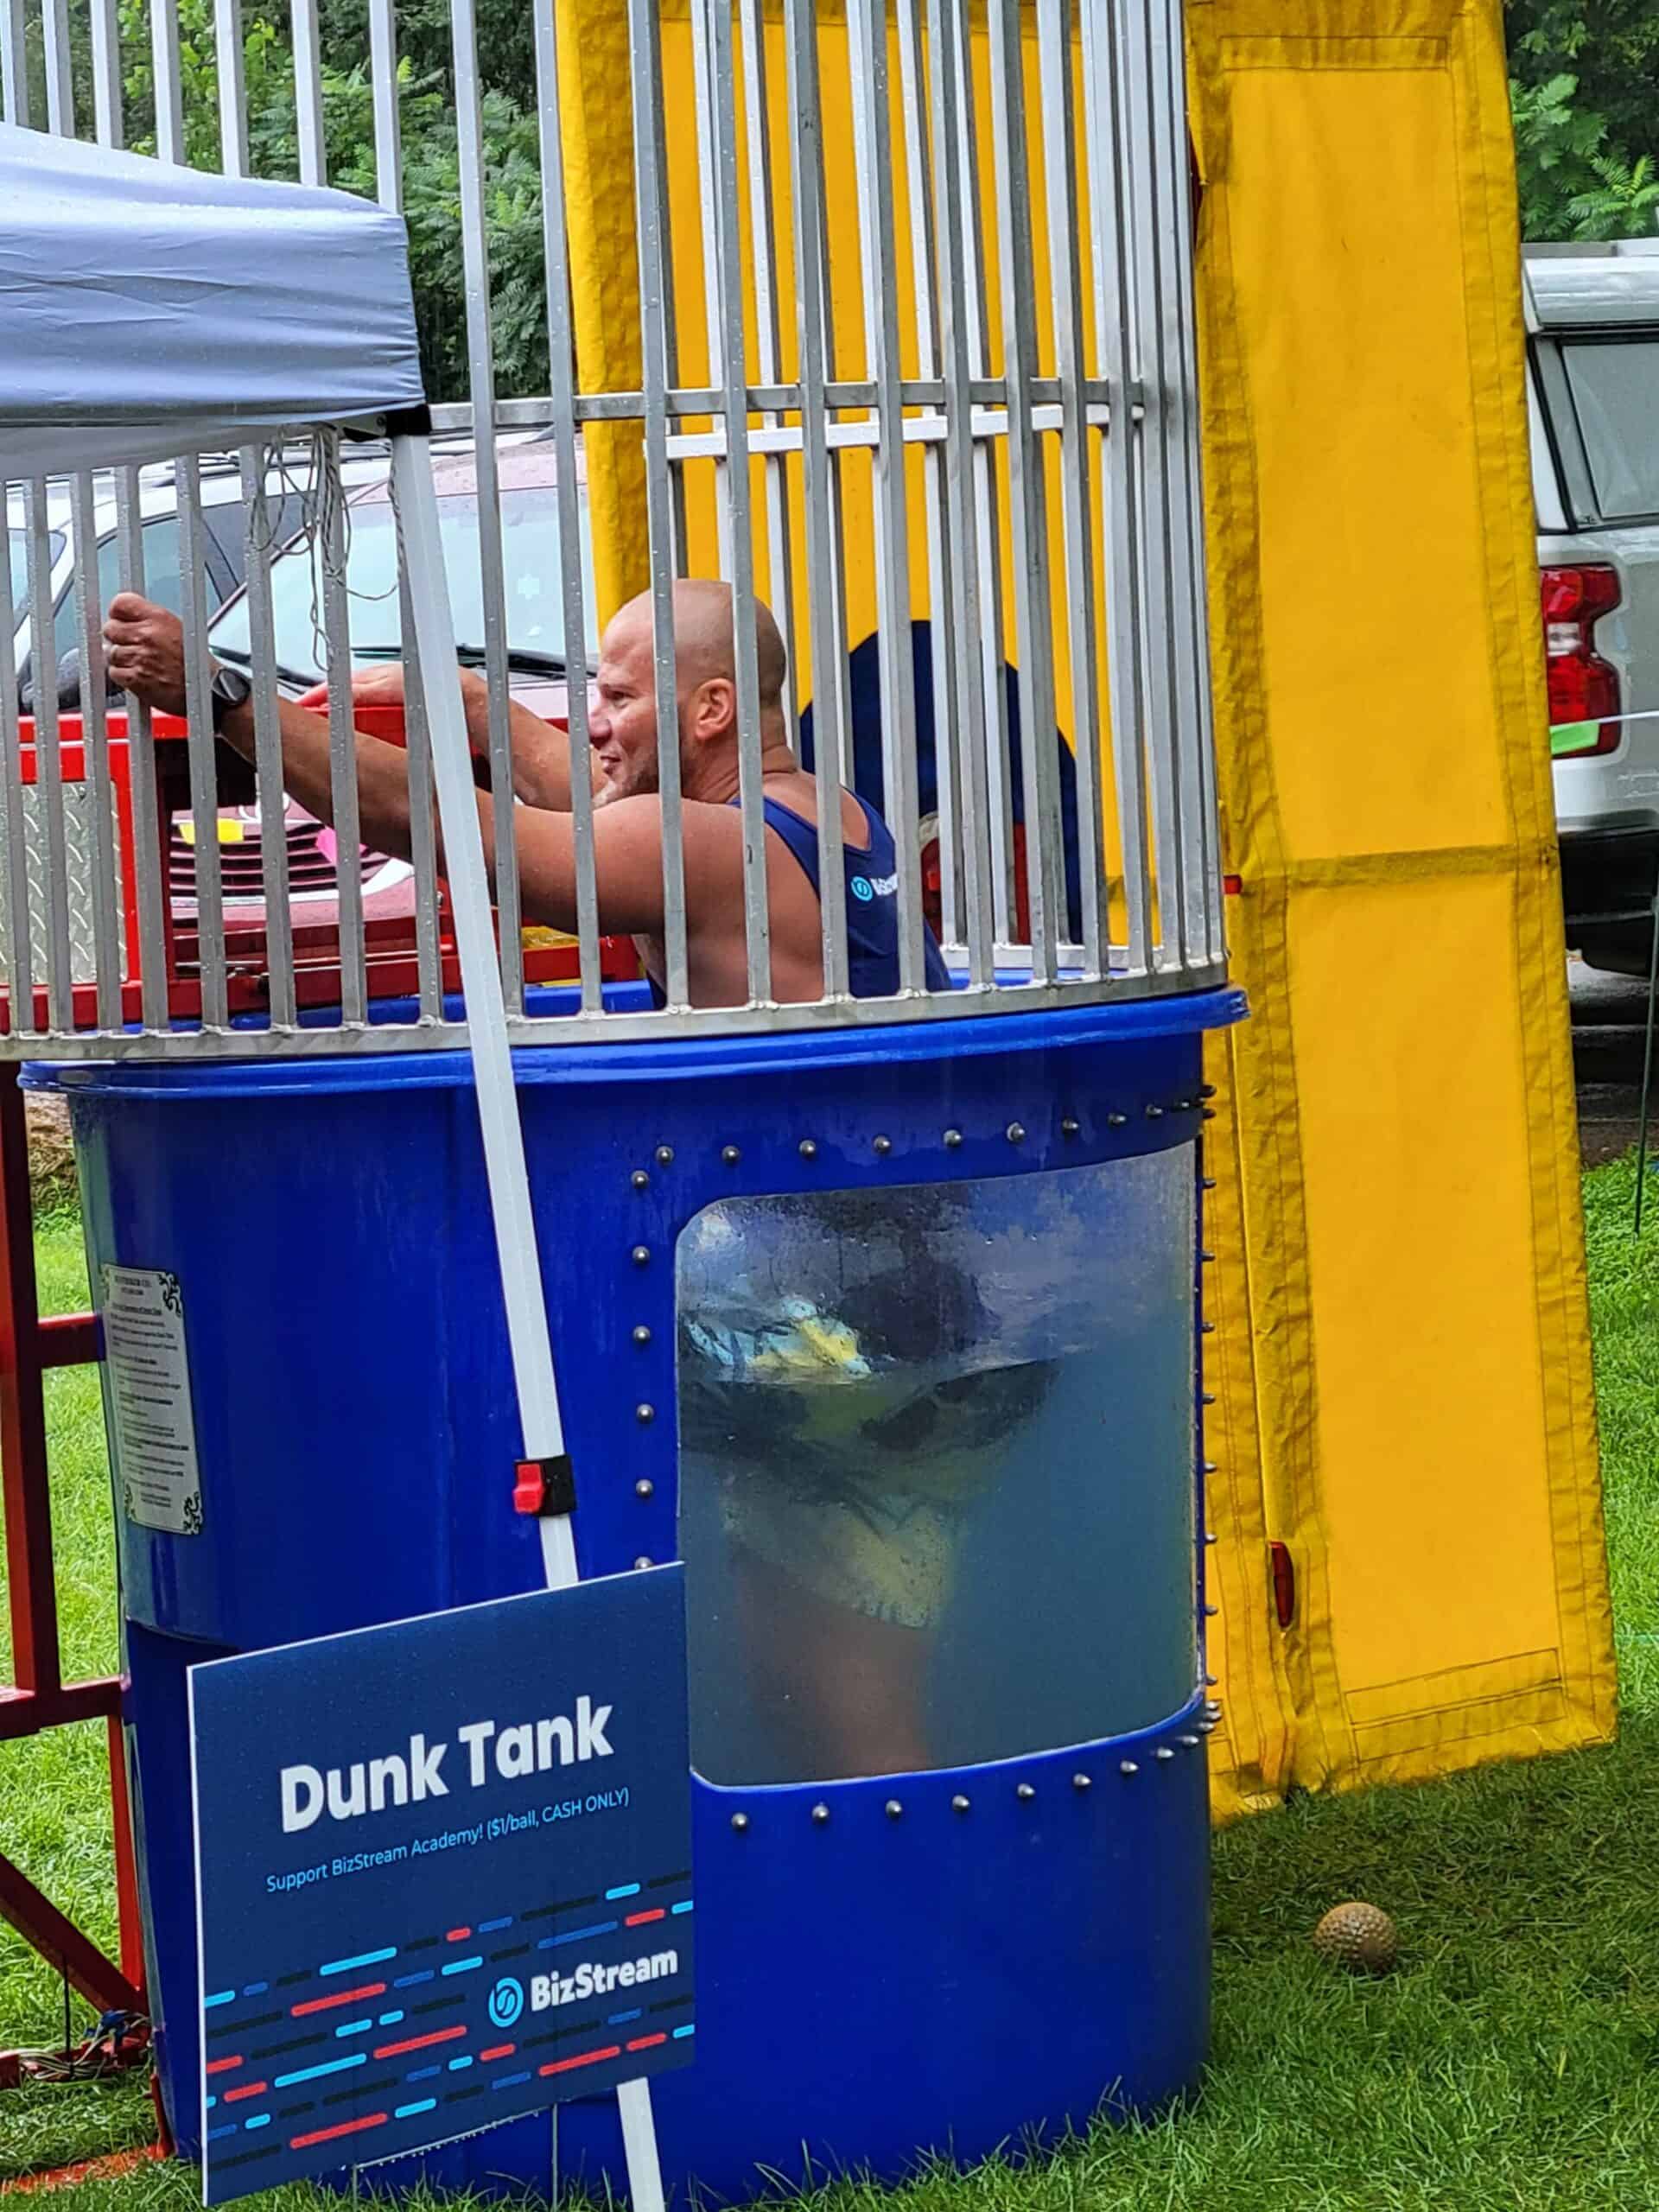 Person falling into a dunk tank